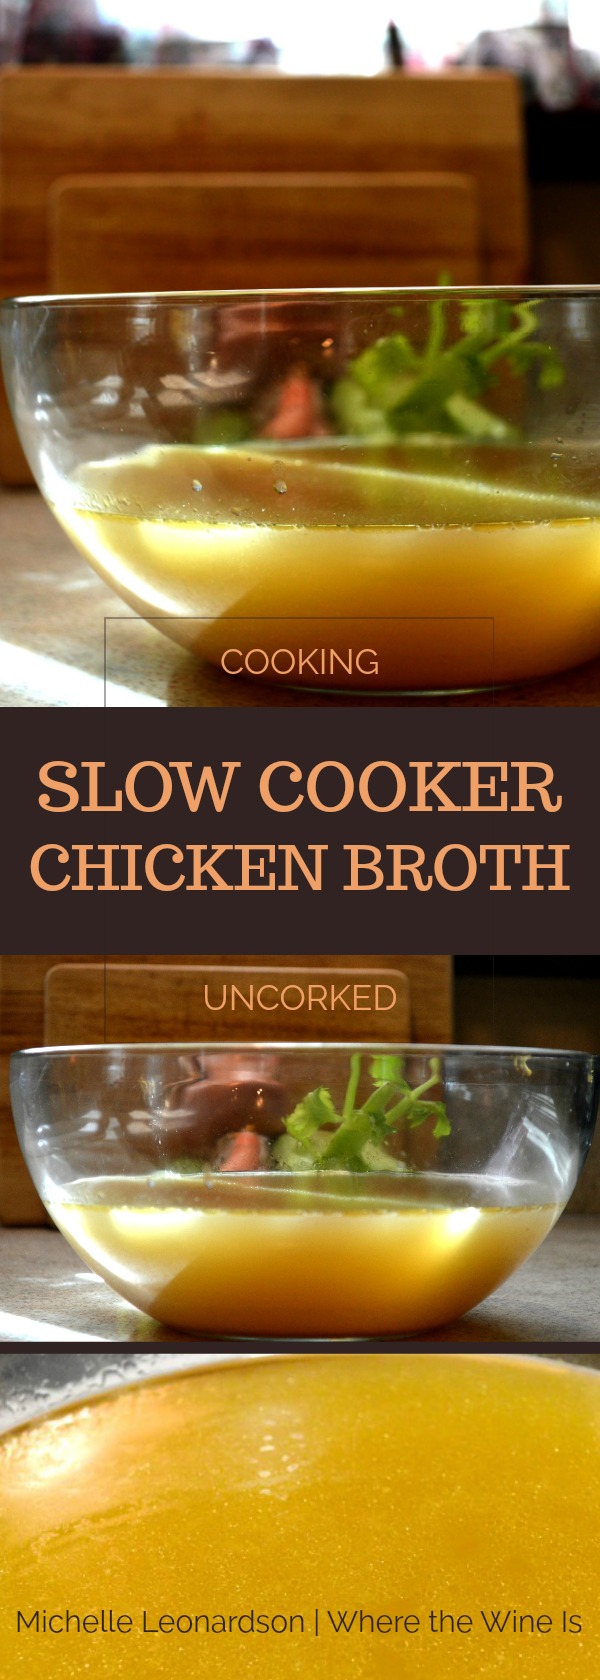 Slow cooker chicken broth is super easy and the addition of wine adds a nice, smooth flavor. Freeze, thaw and enjoy as needed!